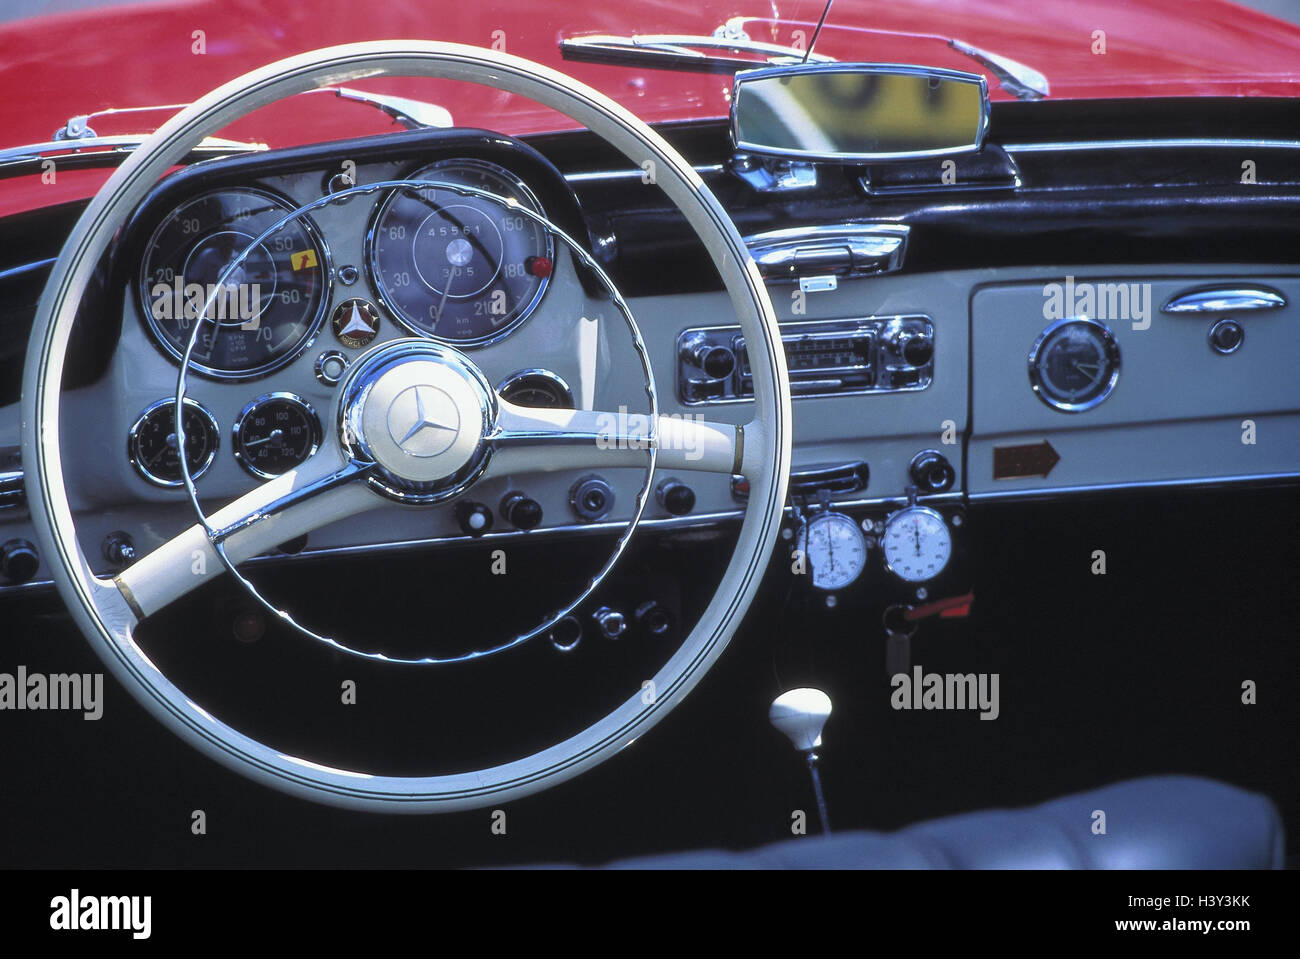 Car, old-timer, Mercedes Benz, 190 SL, year manufacture in 1960, convertible, detail, cockpit, armatures, tax car, passenger car, sports car, convertible, cabriolet, autotypes, inside, walk lever, gear Stock Photo